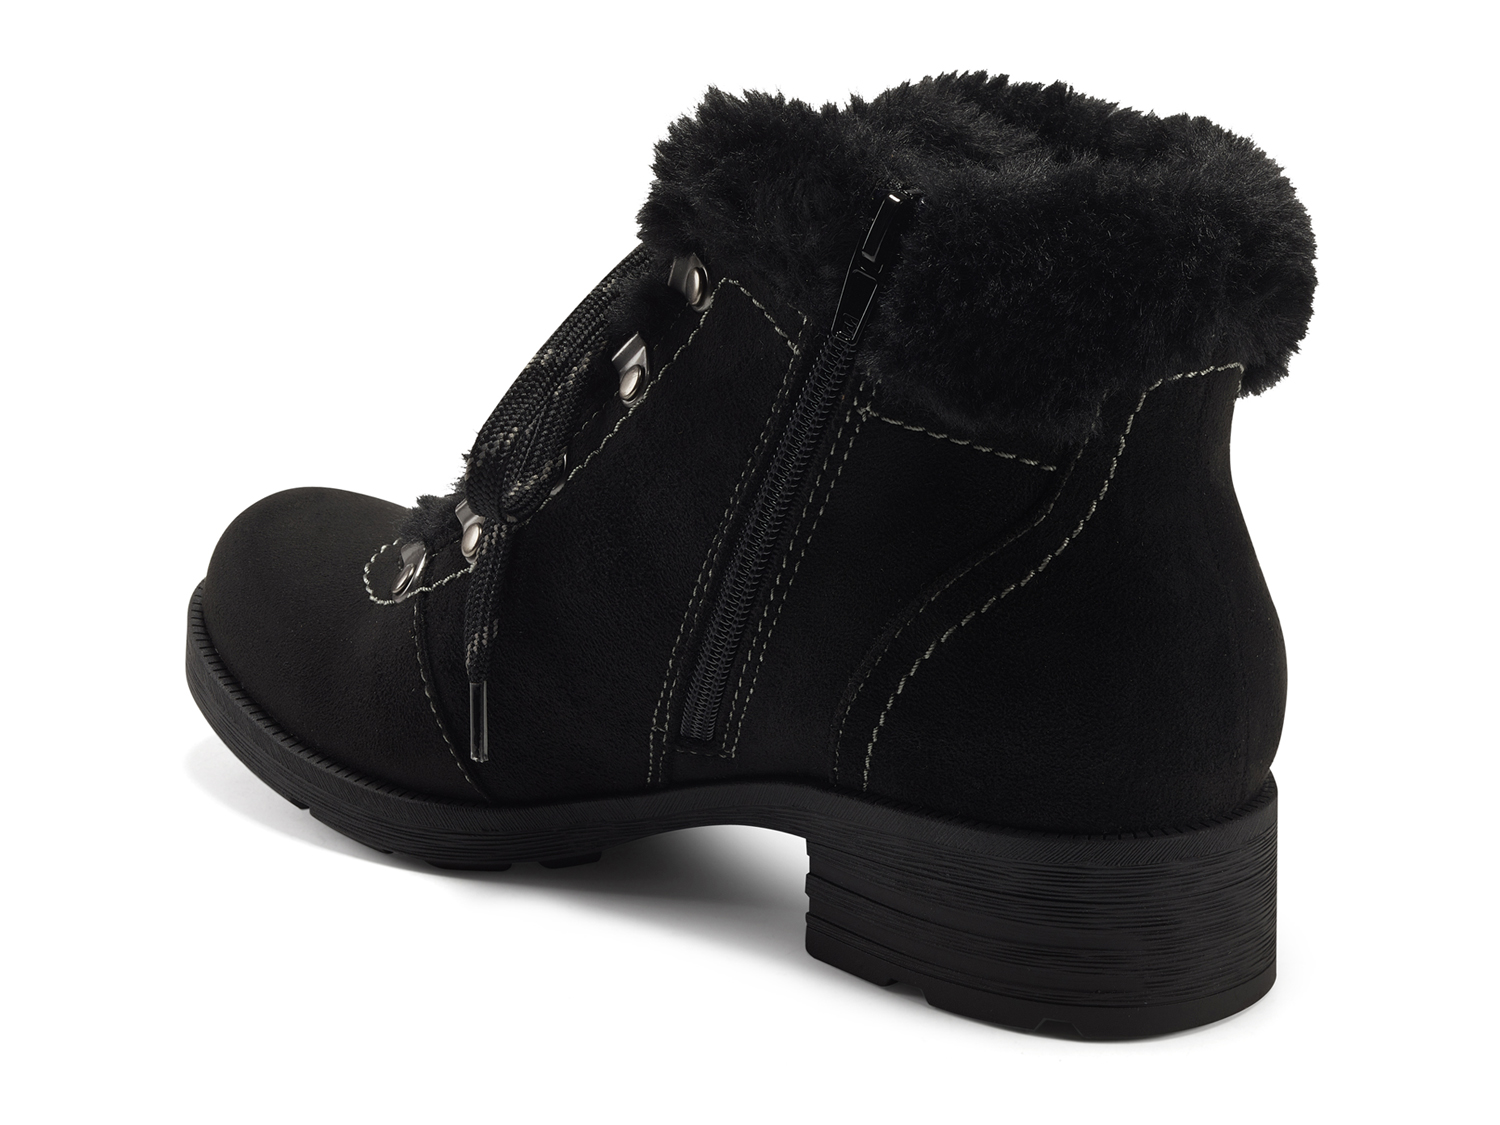 Earth Rada Women's Leather Faux Fur Lined Lace-Up Booties